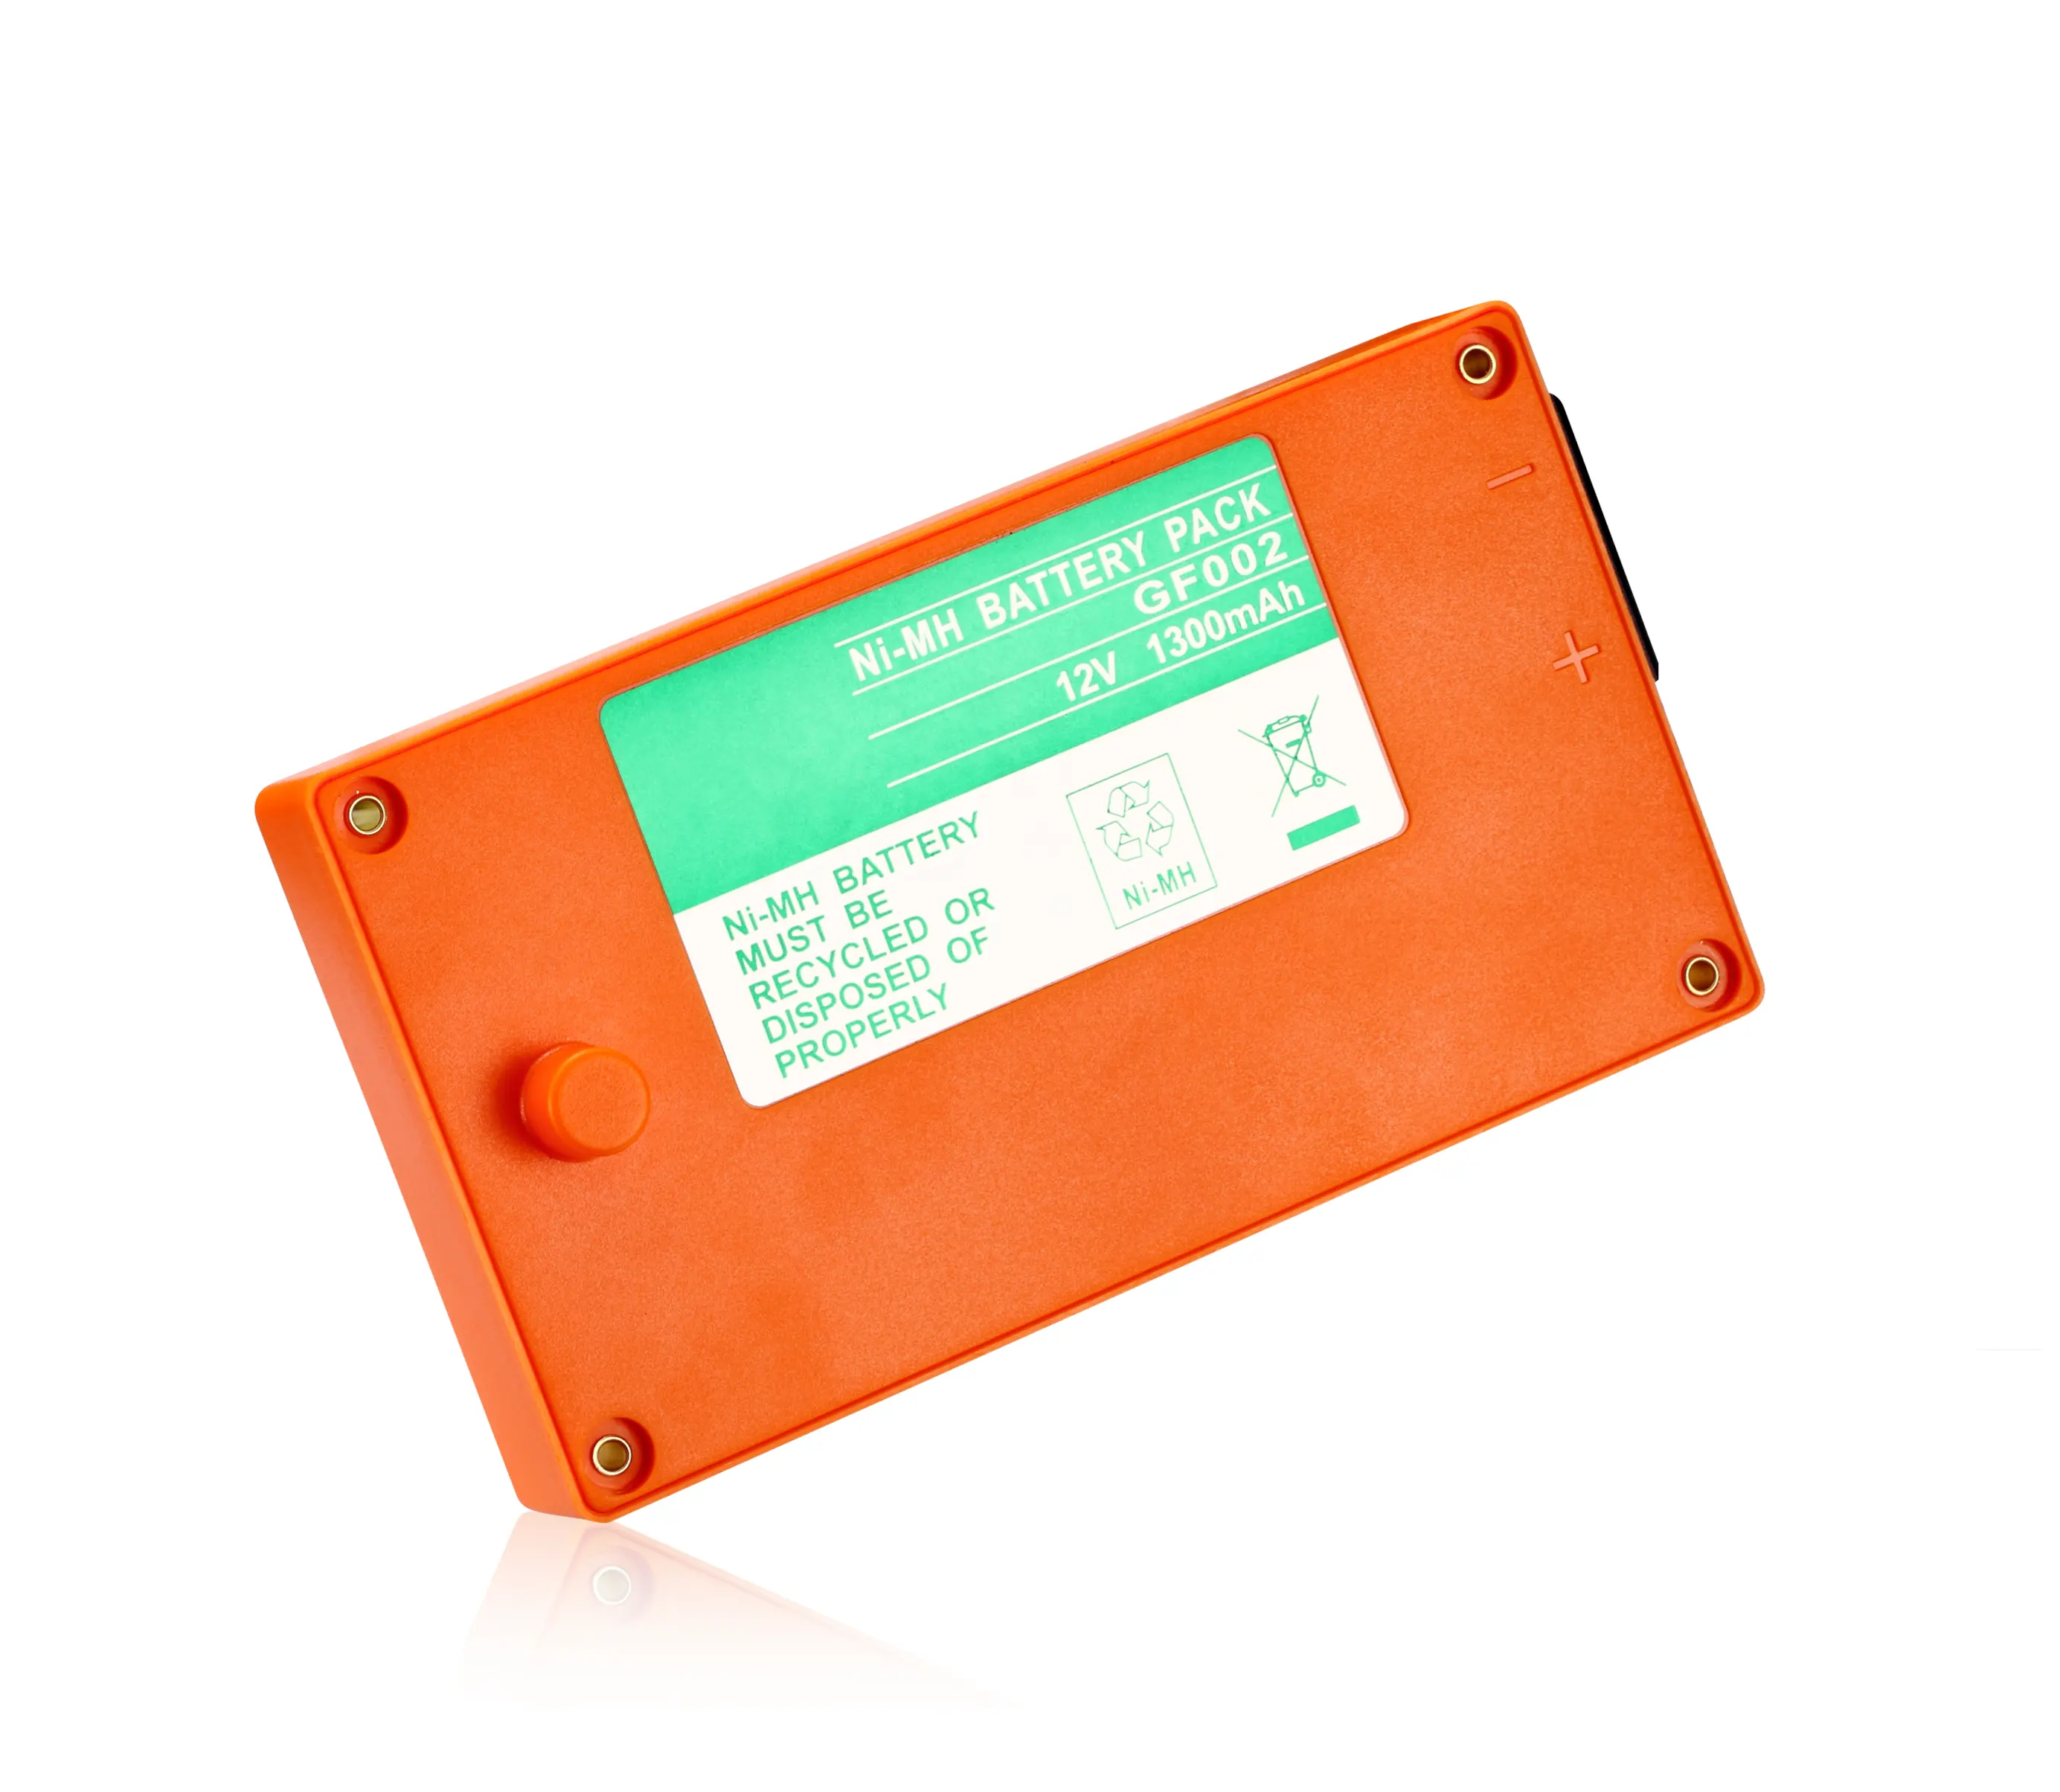 Rechargeable Battery MH 12V/1800mAh battery GF002 for Grossfunk SE889